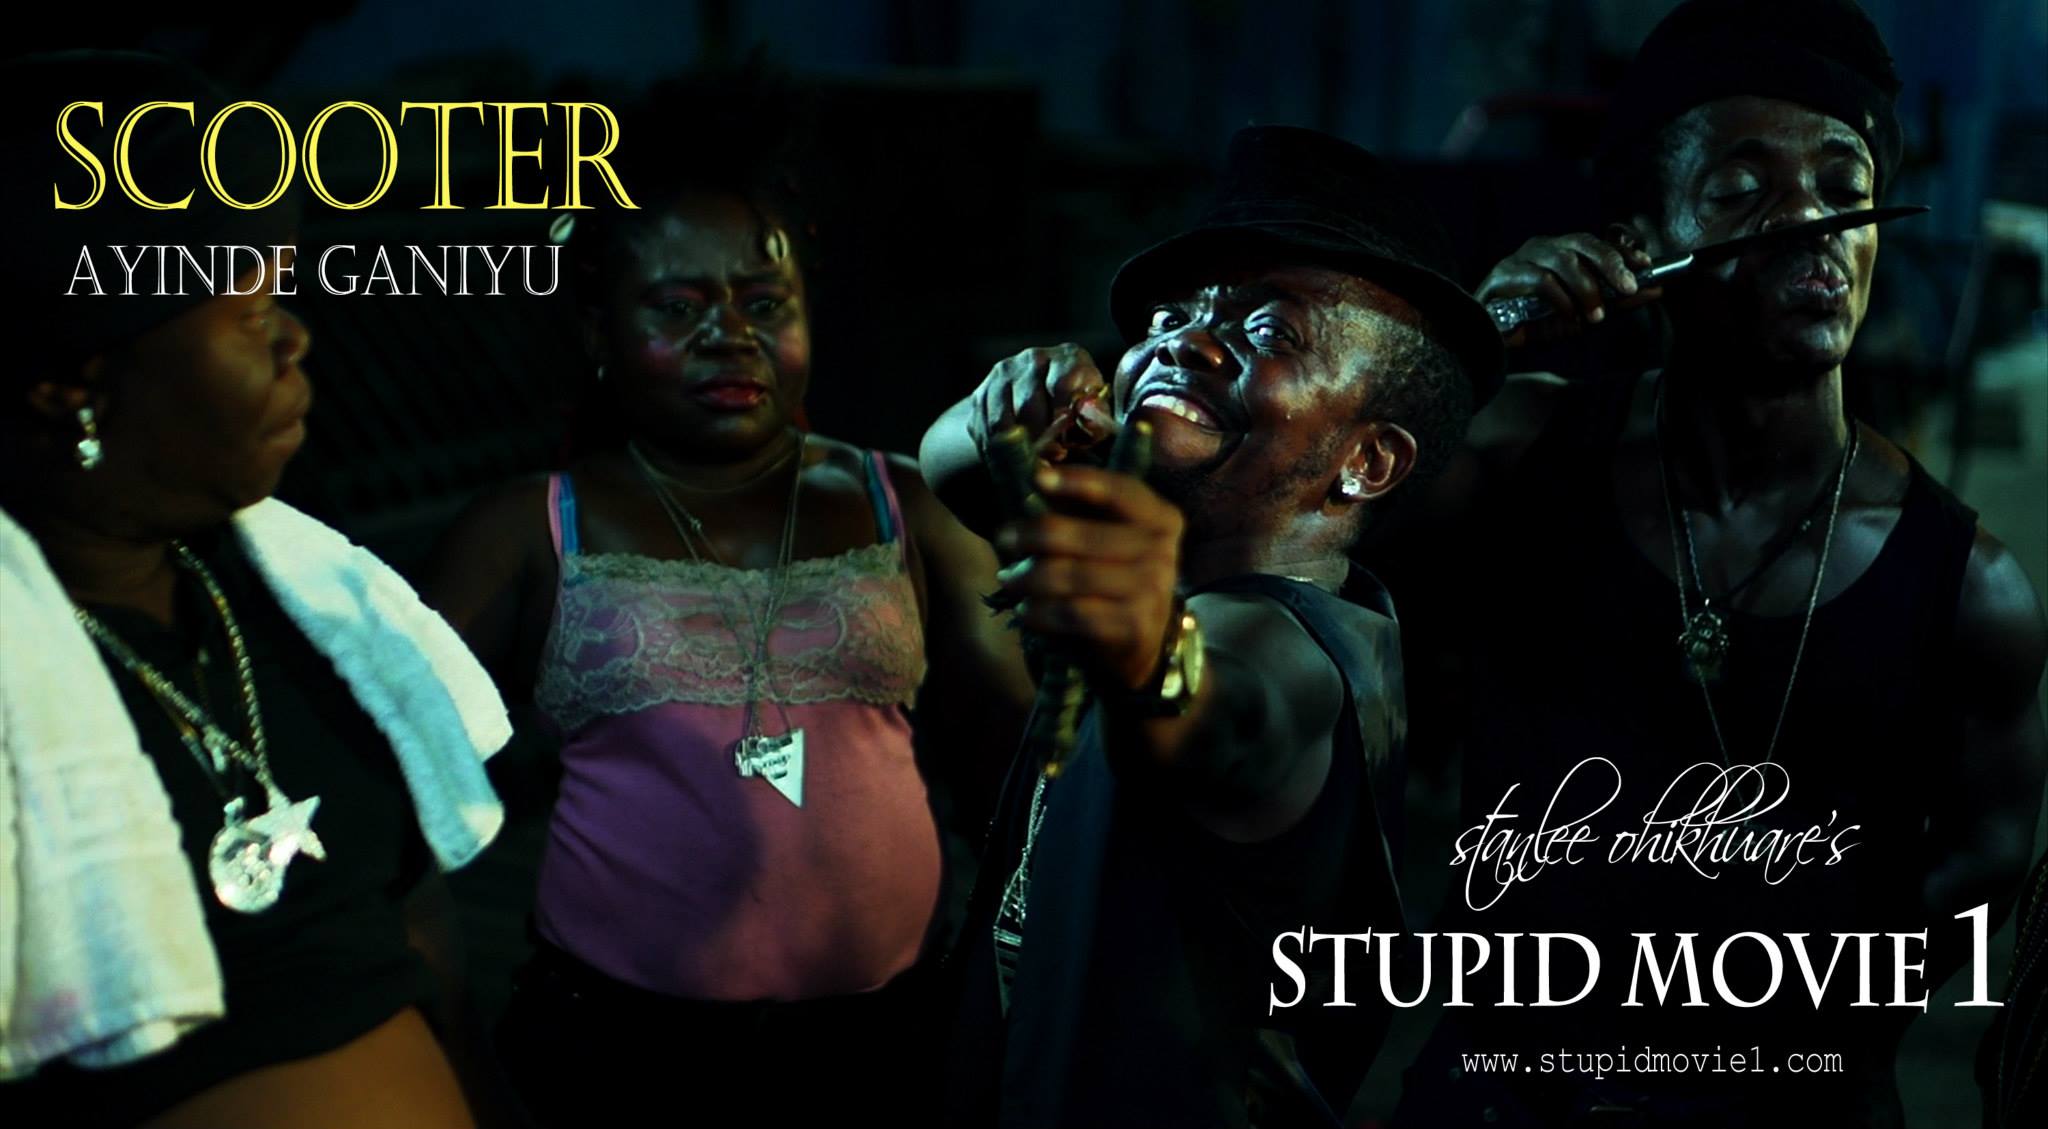 CHARACTER POSTER (SCOOTER) for Stanlee Ohikhuare's STUPID MOVIE 1